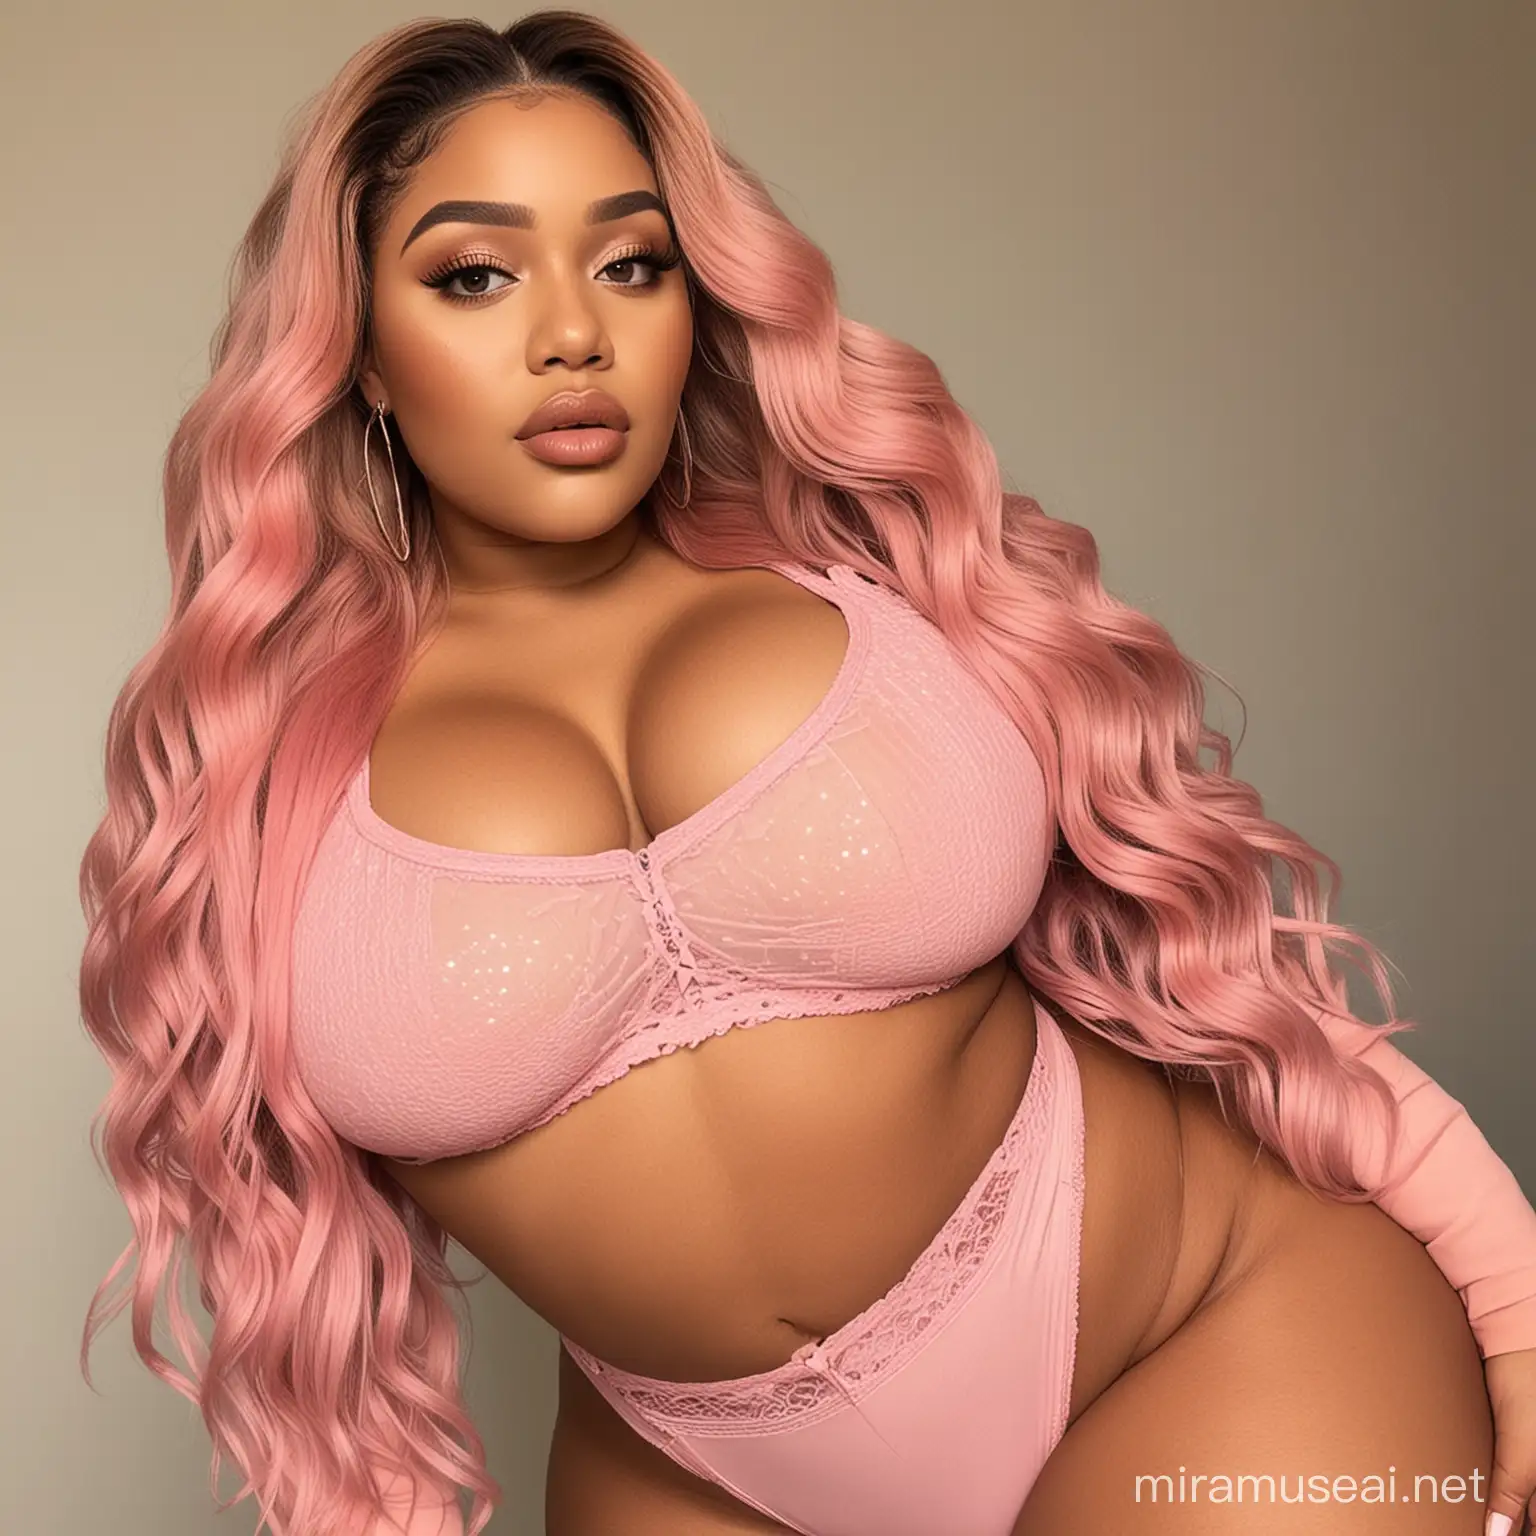 Image prompt/: generate pictures full body of a light skinned south african curvy, thick, plus size girl that looks like me, with a straight brown hd lace front weave, thirst trap in pink